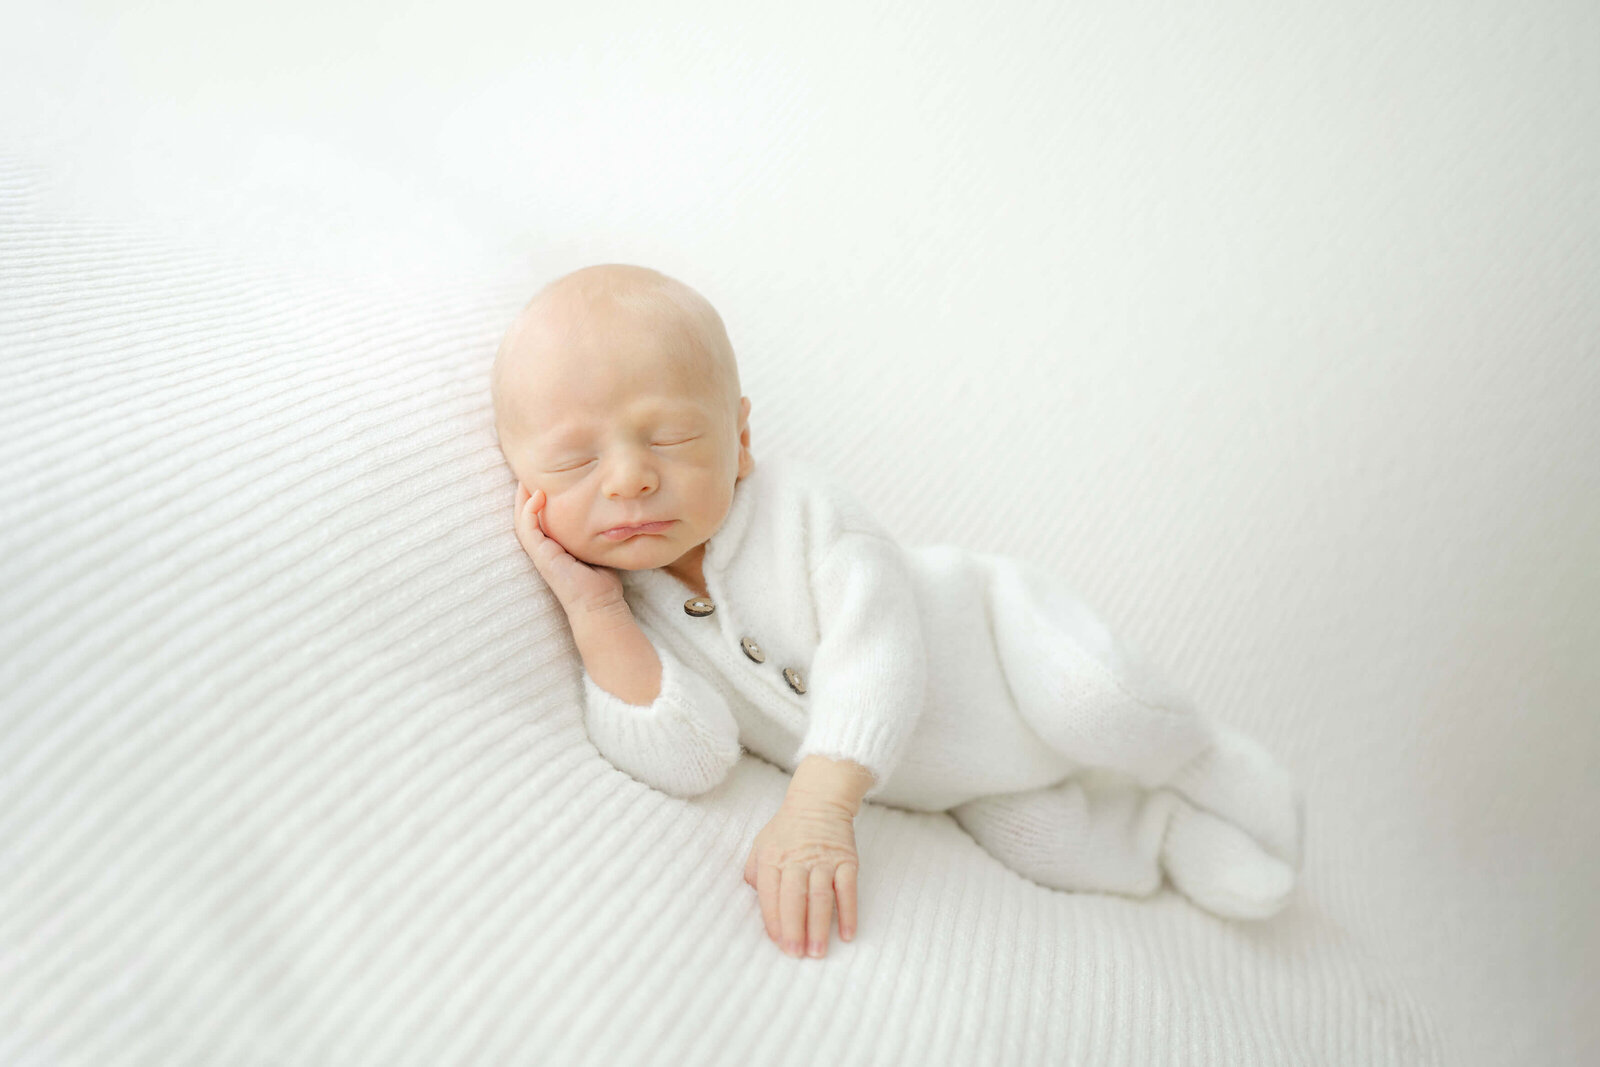 oklahoma city newborn sleeping in a white fuzzy outfit